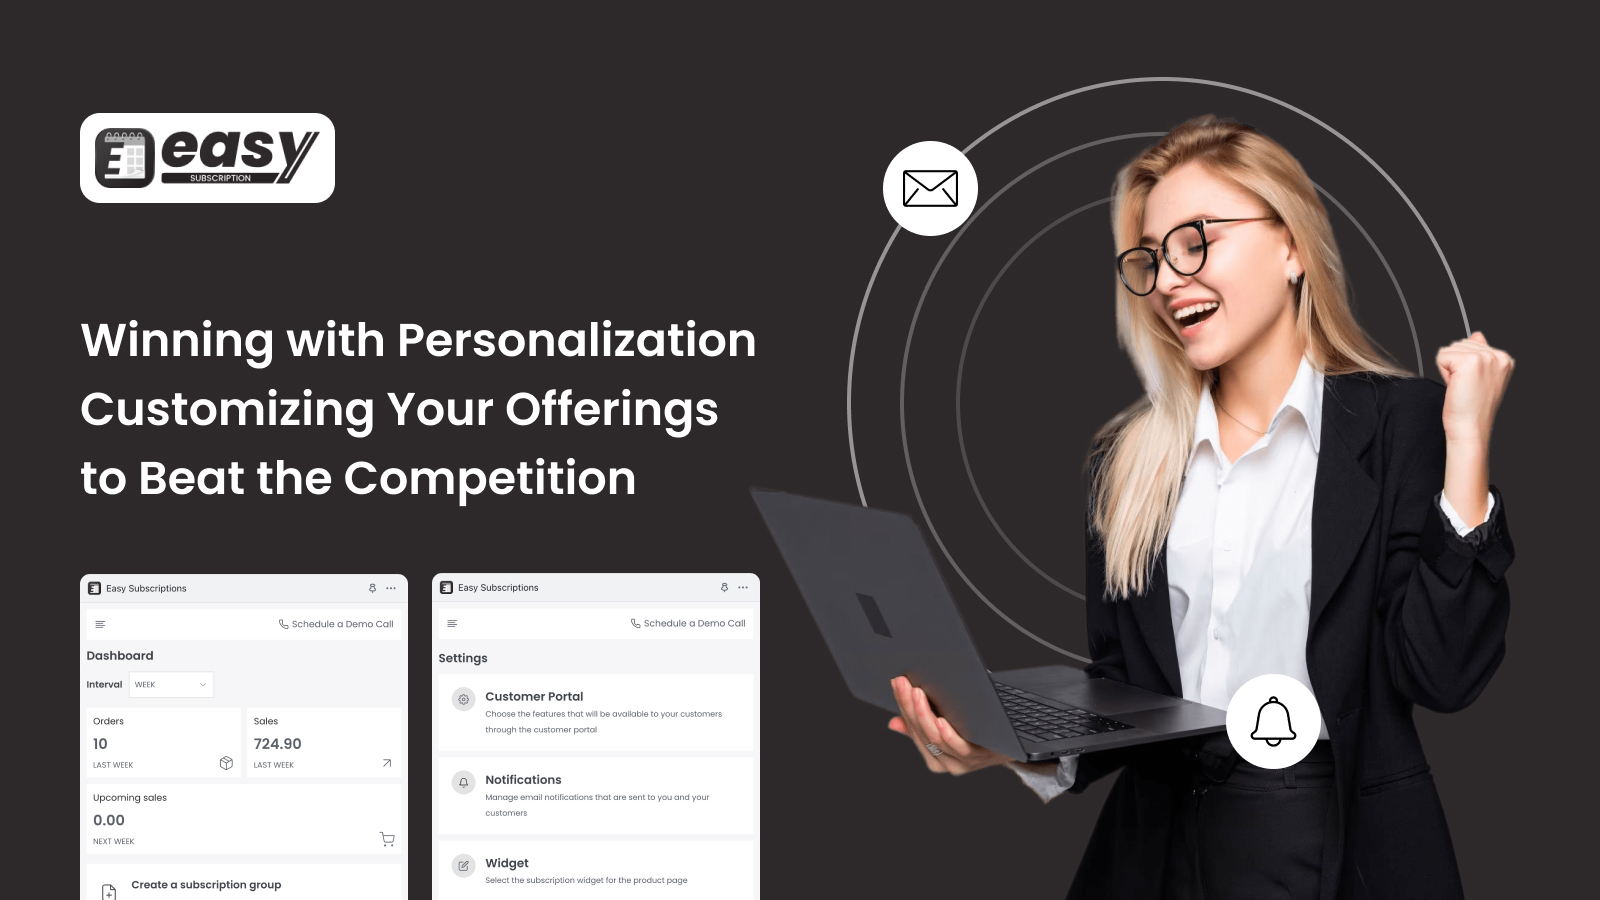 Winning with Personalization: Customizing Your Offerings to Beat the Competition